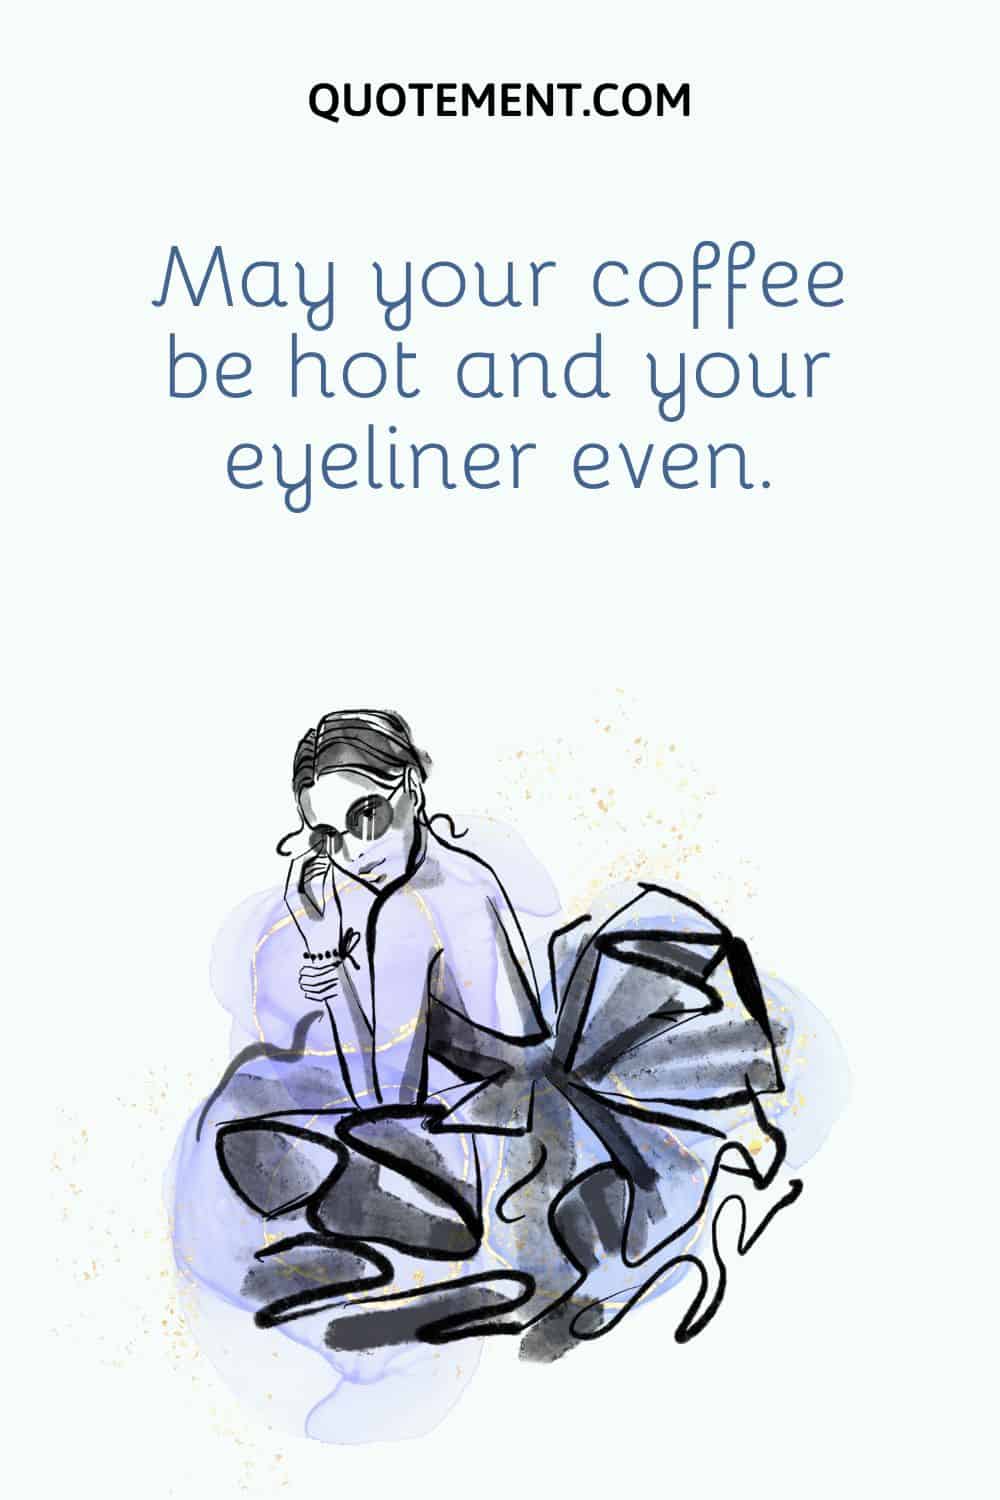 May your coffee be hot and your eyeliner even.